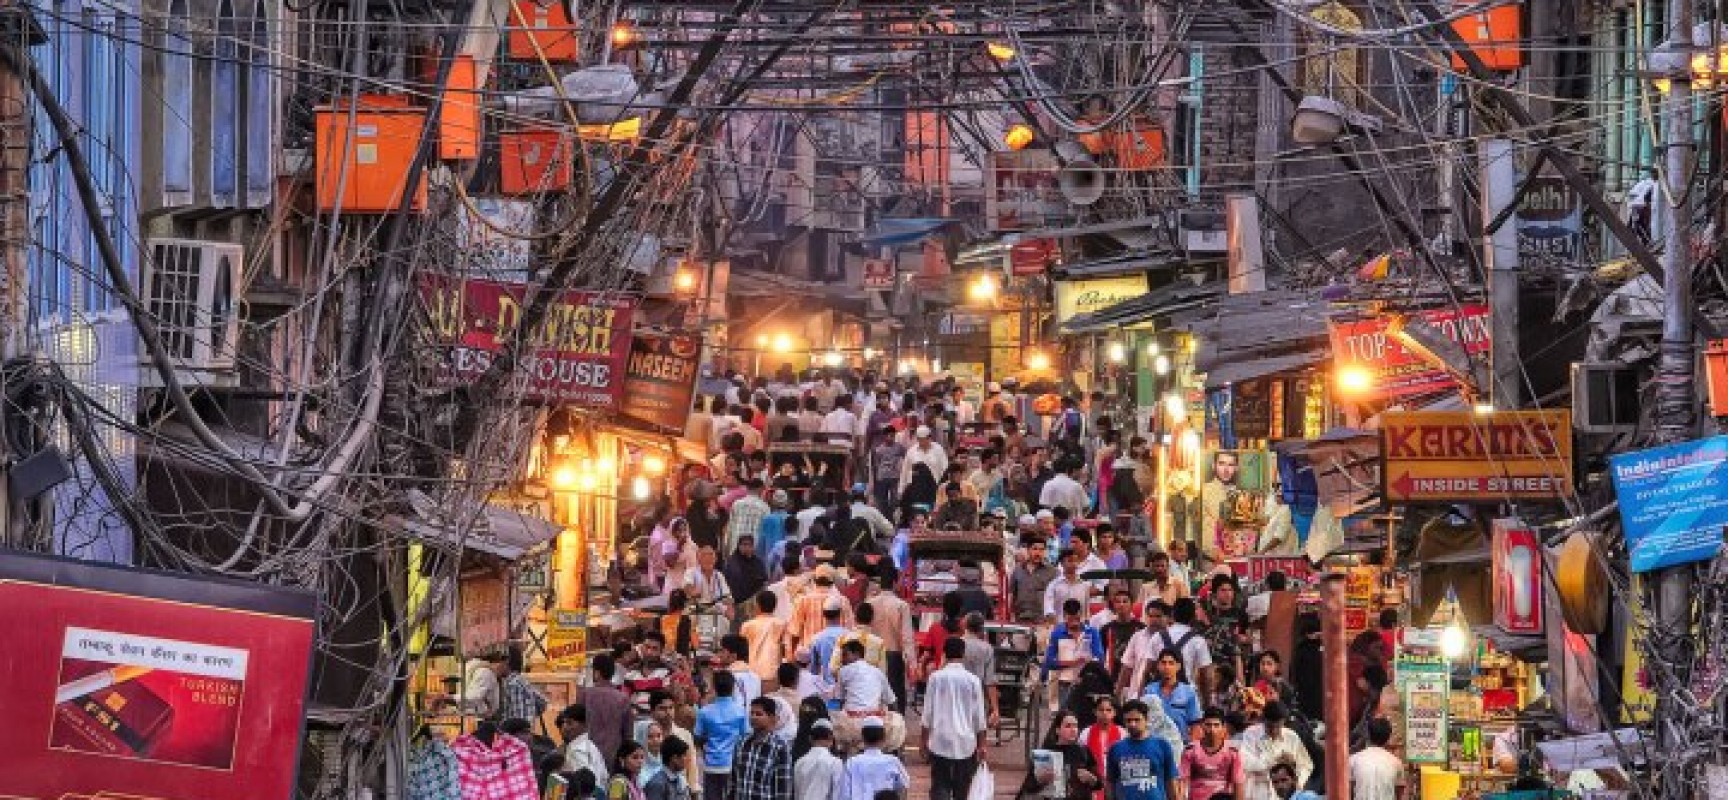 Chandni Chowk – The Streets of Chaos, Hhistory and Wonder